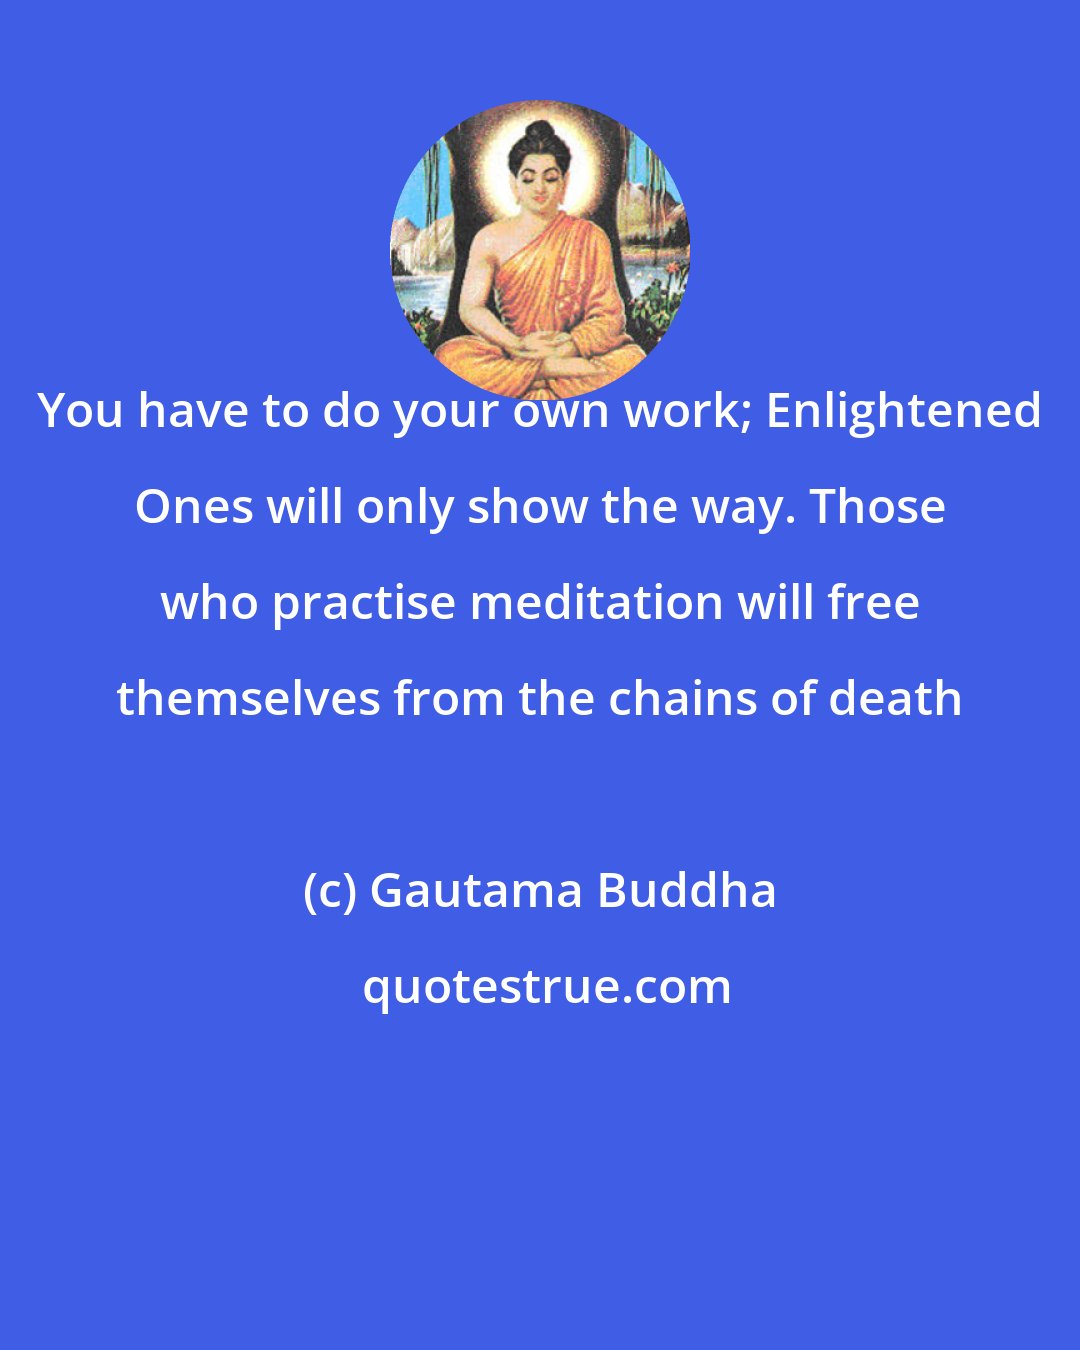 Gautama Buddha: You have to do your own work; Enlightened Ones will only show the way. Those who practise meditation will free themselves from the chains of death